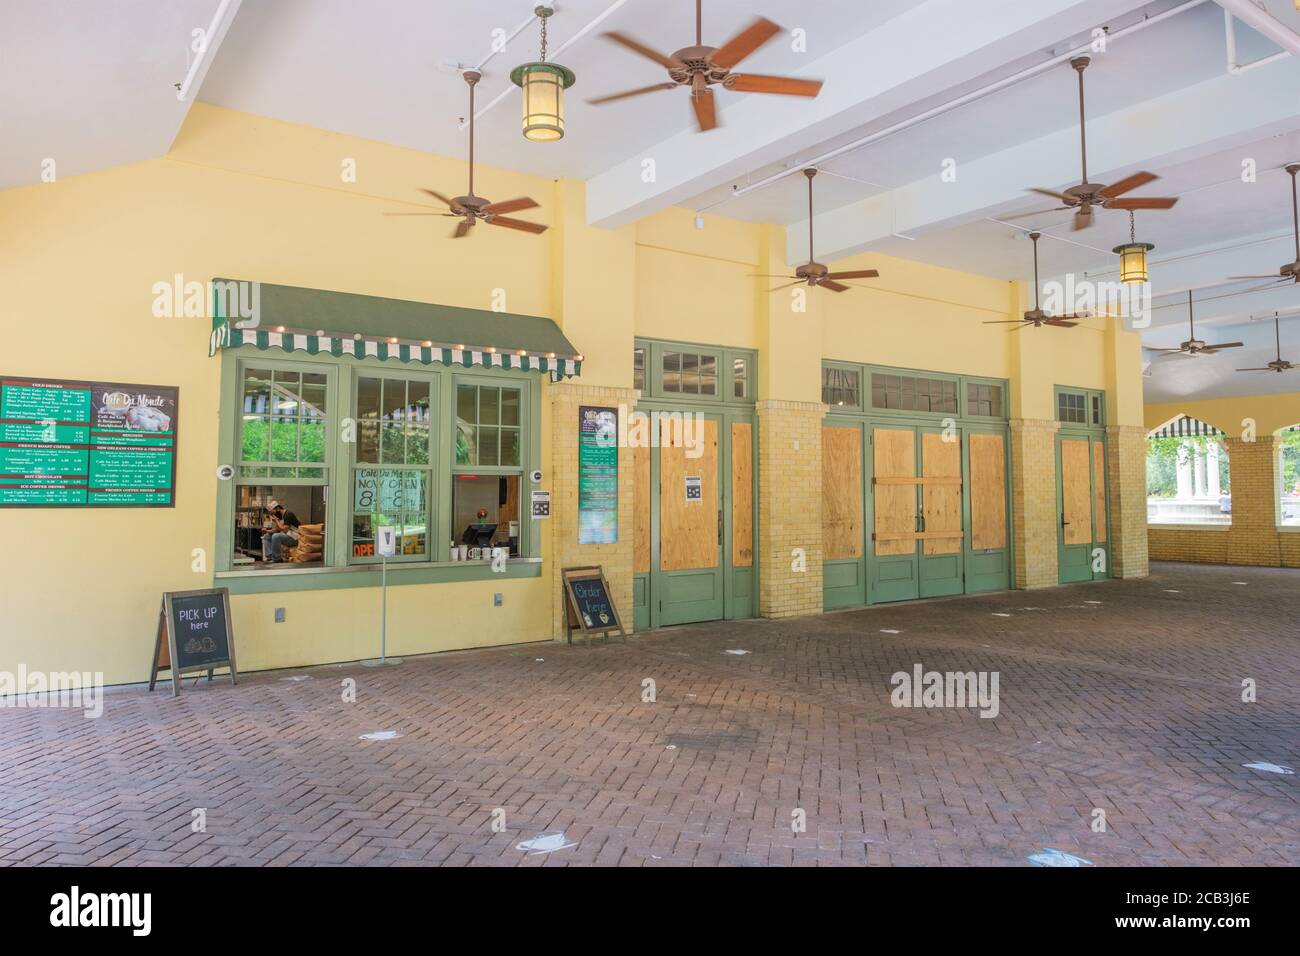 New Orleans, Louisiana/USA - 8/4/2020: Cafe Du Monde in City Park Open for Takeout Only During Corona Virus Pandemic Stock Photo